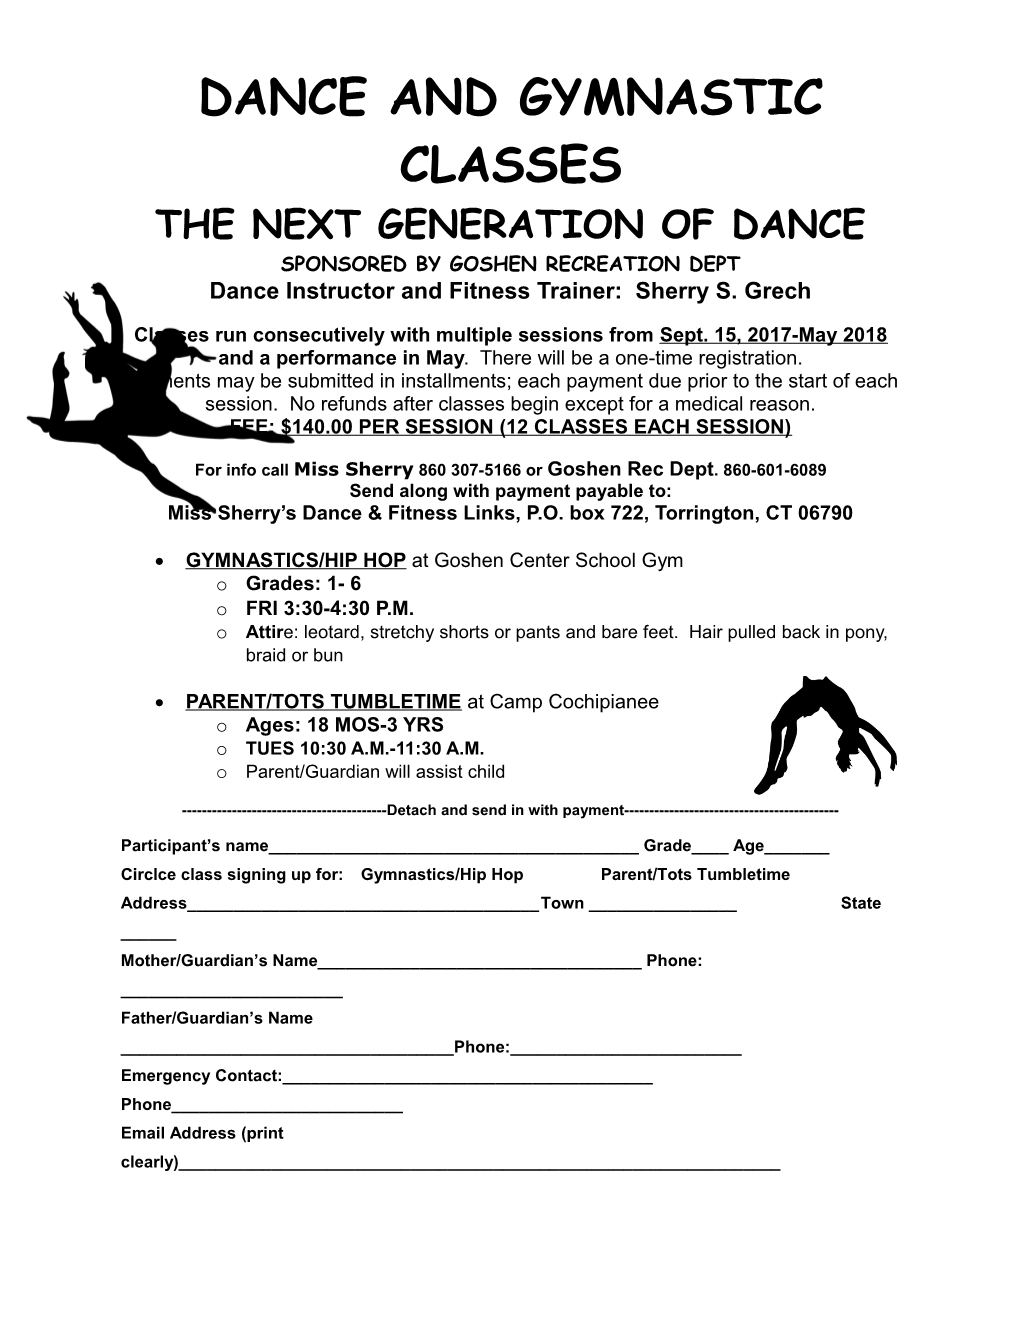 2009 Summer Dance and Gymnastic Classes